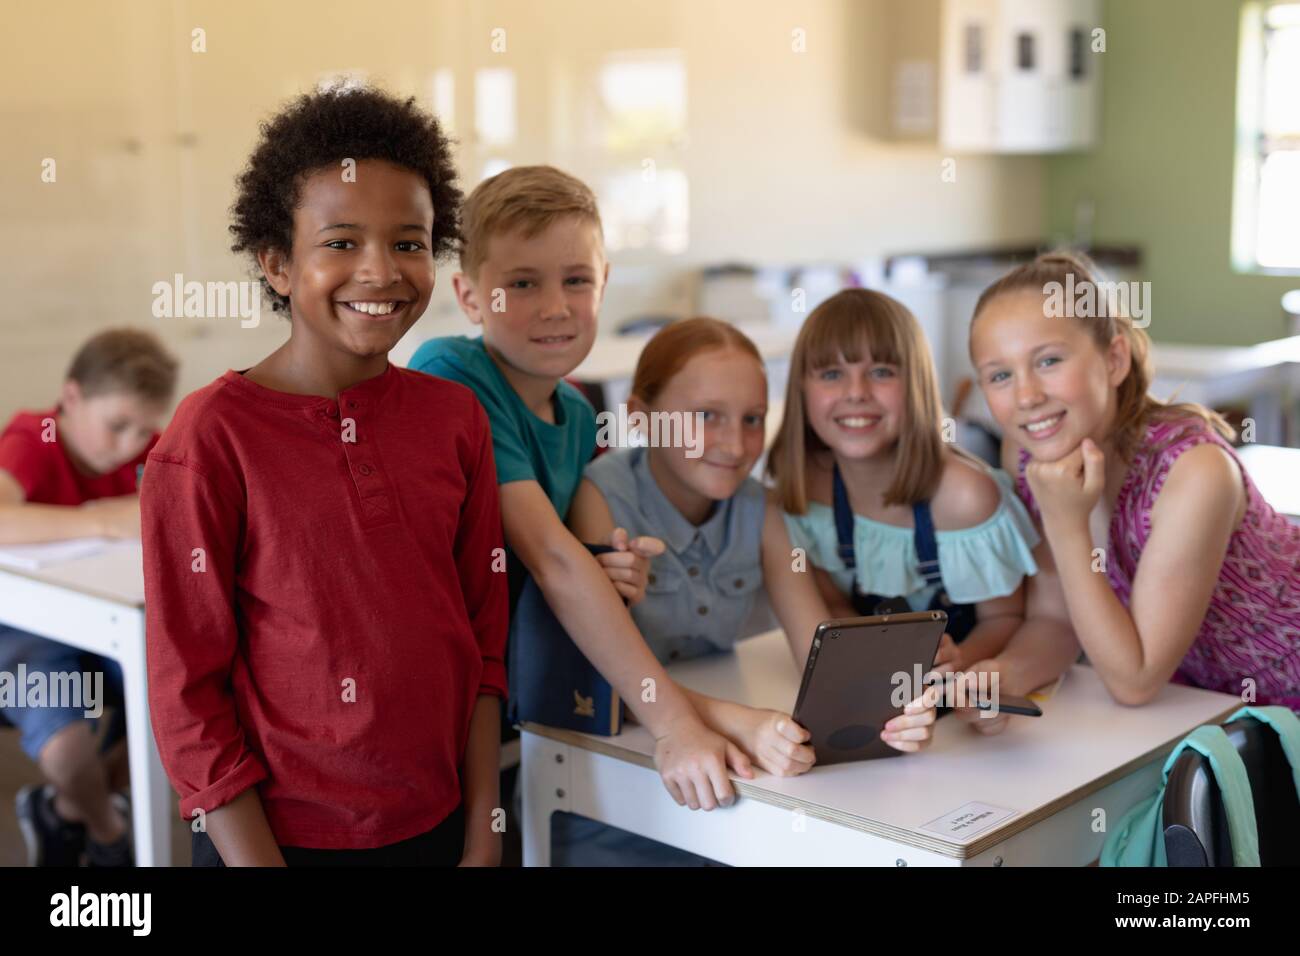 Group of schoolchildren around a desk using a tablet computer Stock Photo